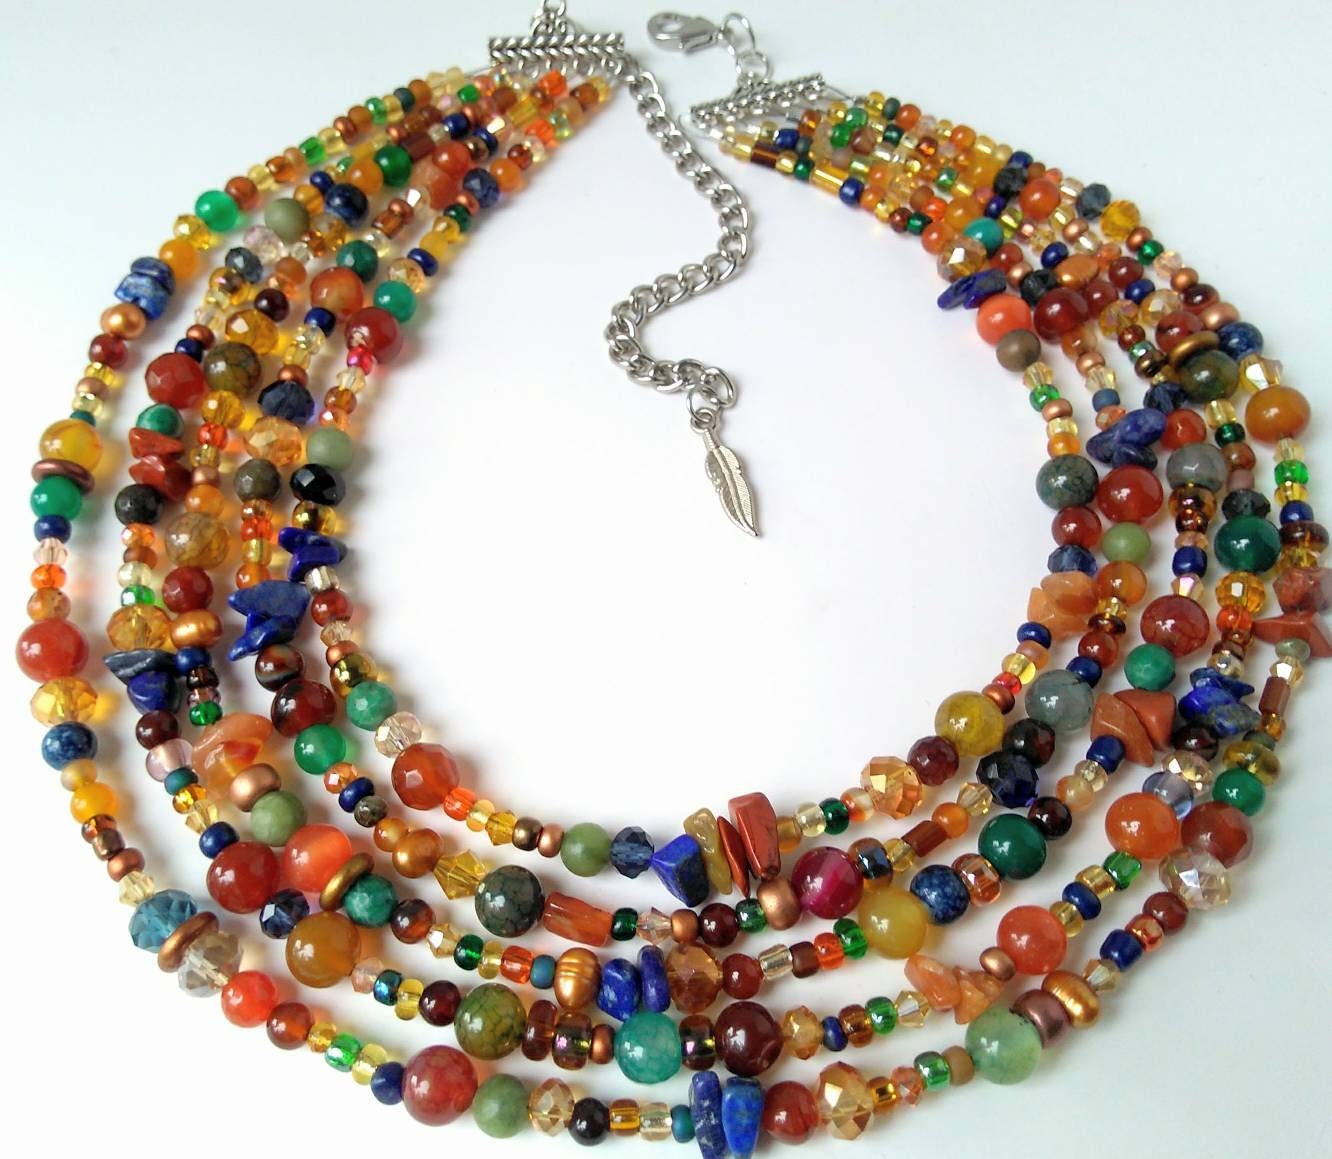 Gemstone Necklace, Beaded Necklace for Women, Colorful Statement ...